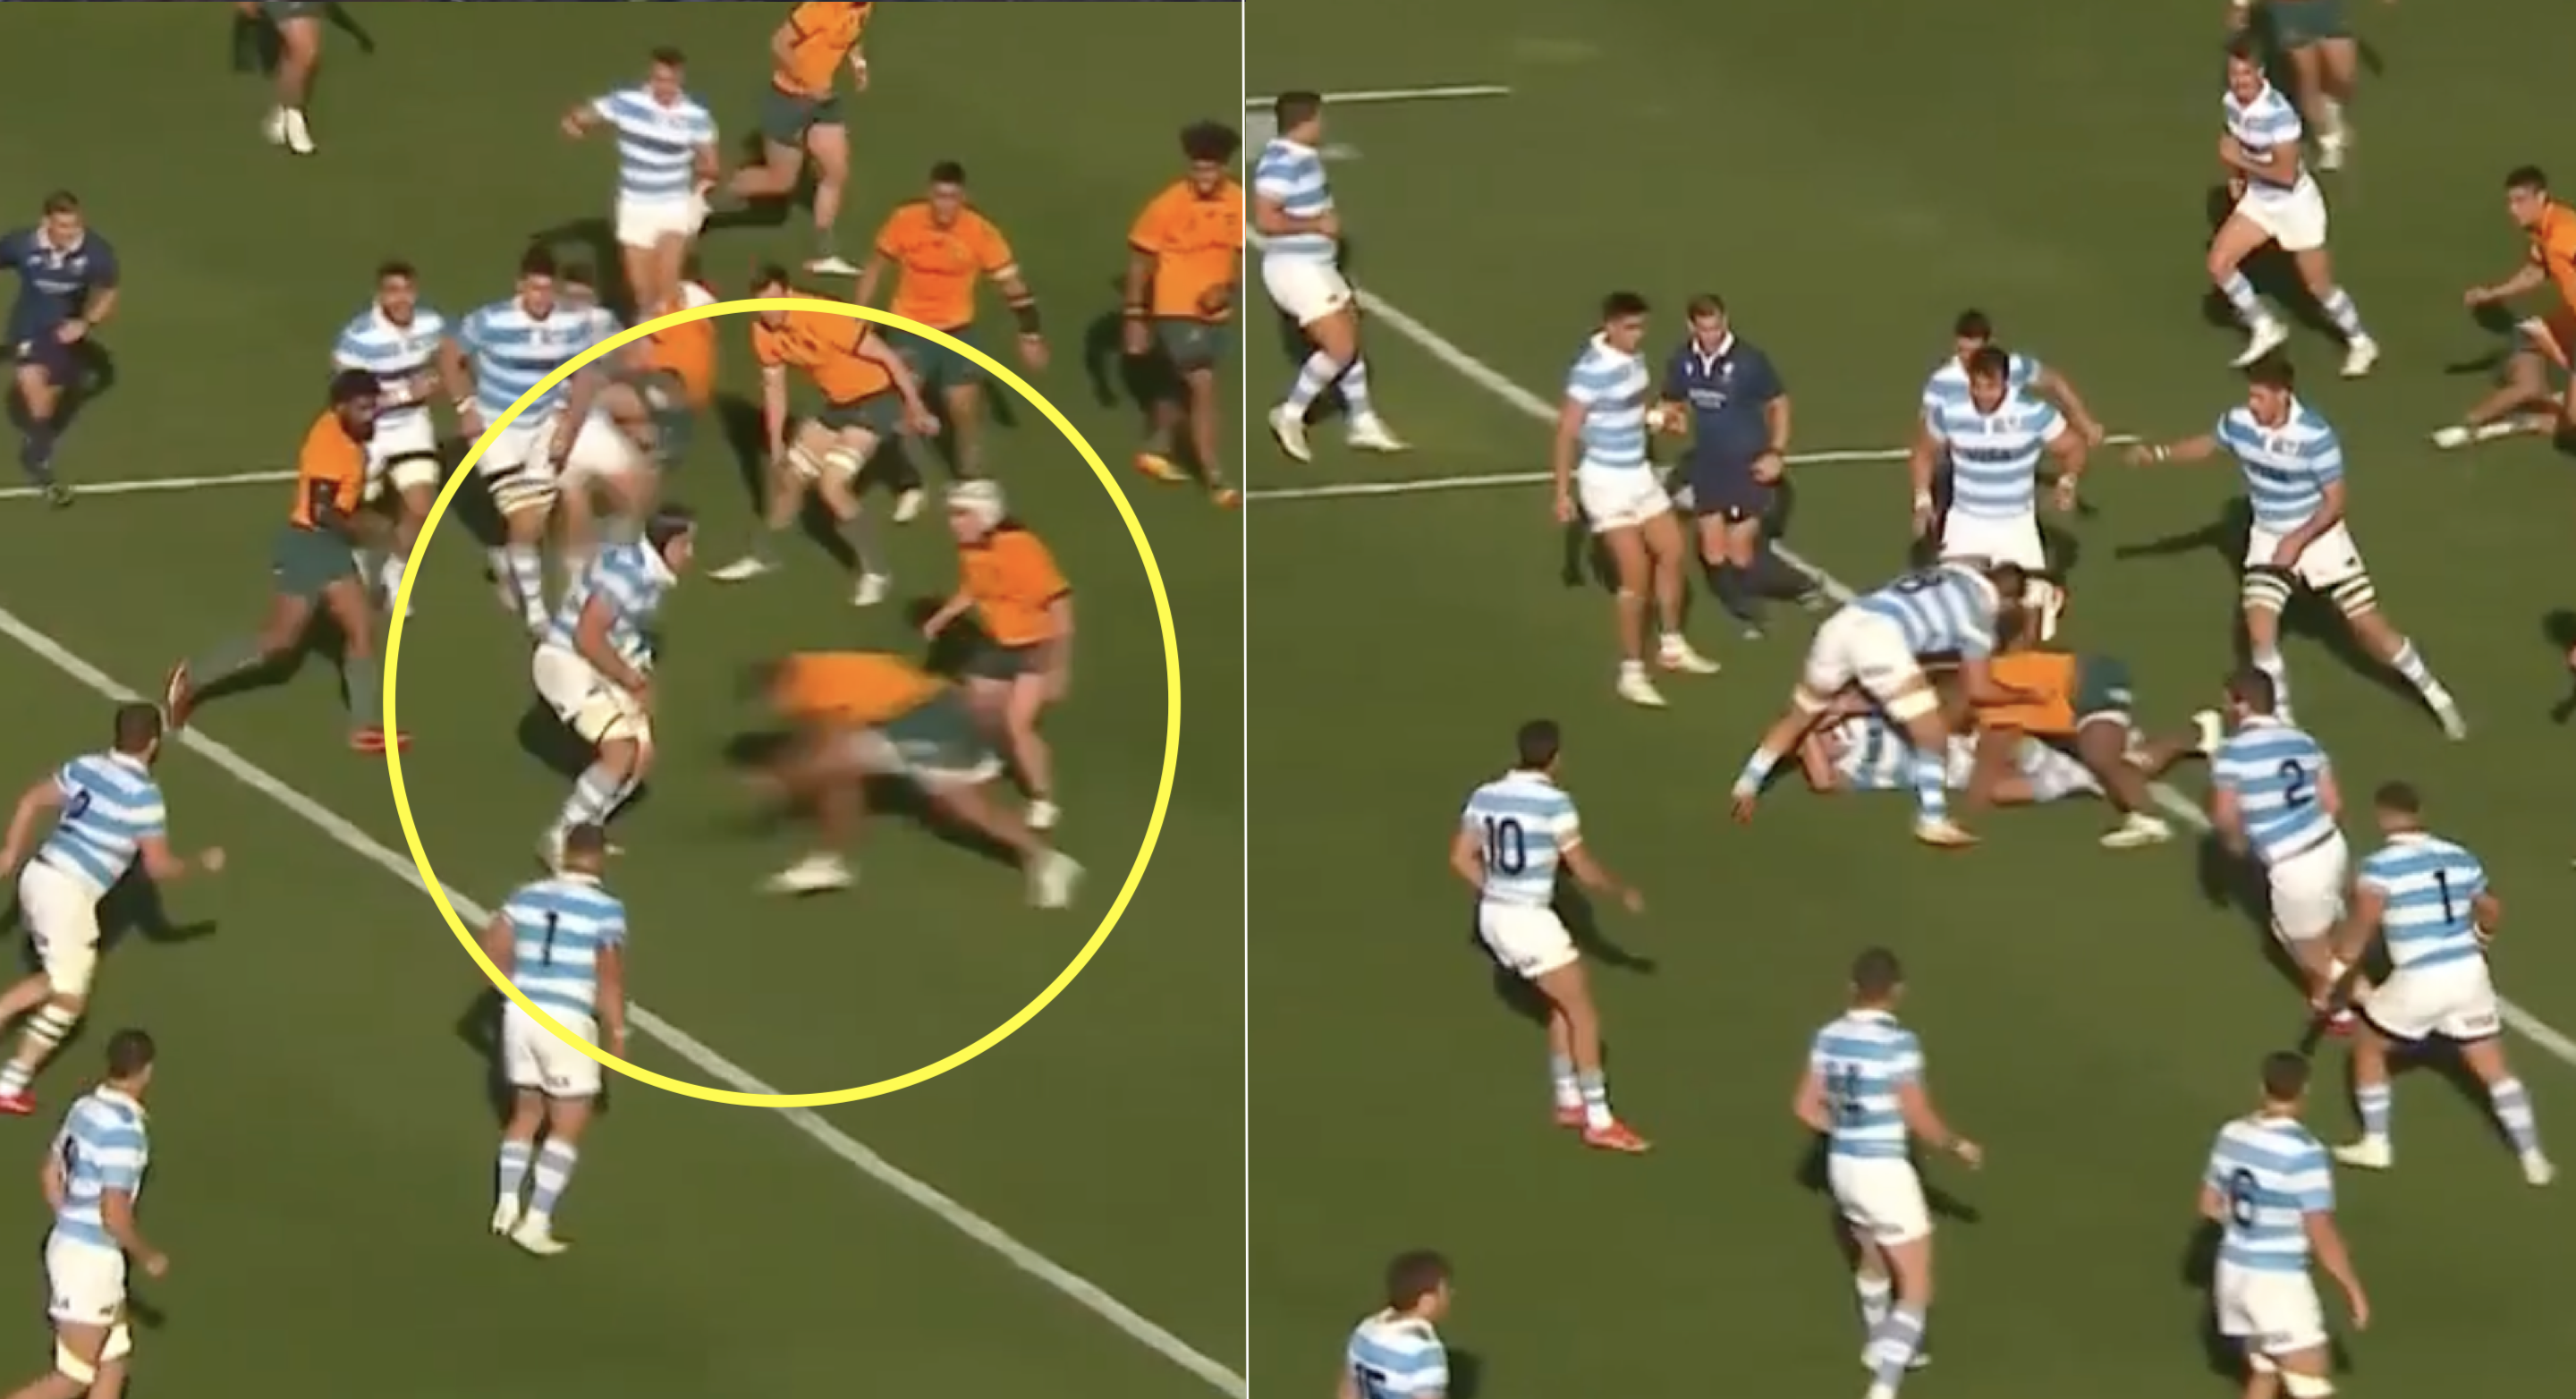 Tongan Thor crushes Argentinian enforcer with 265 kg collision